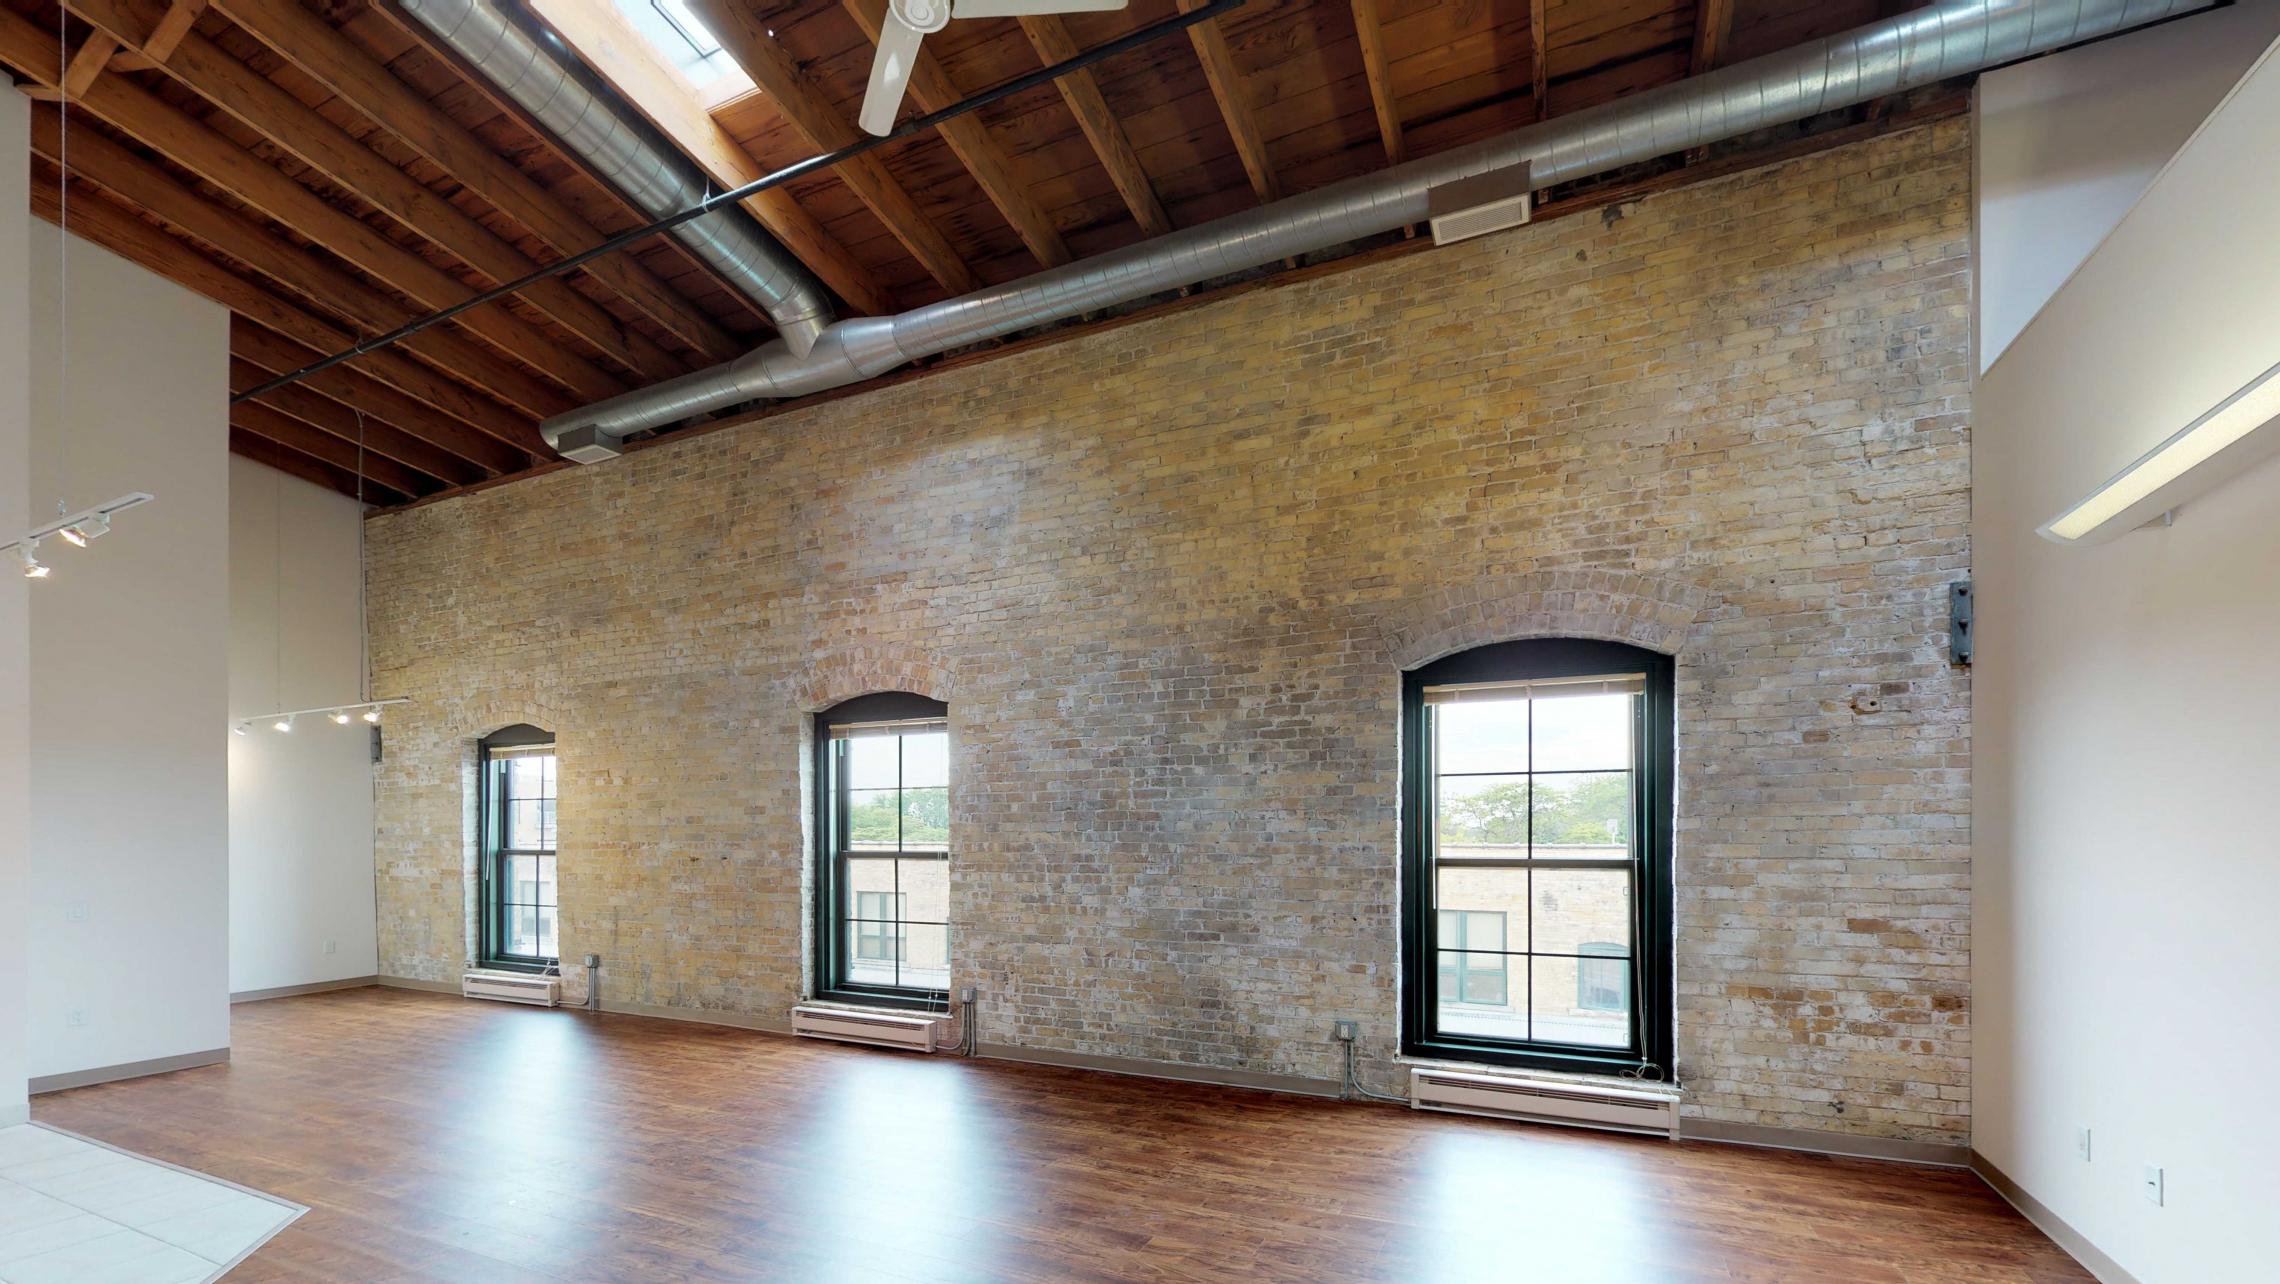 Tobacco-Lofts-Apartment-E306-Lofted-Two-Bedrom-Downtown-Madison-Exposures-Design-Historic-Yards.jpg